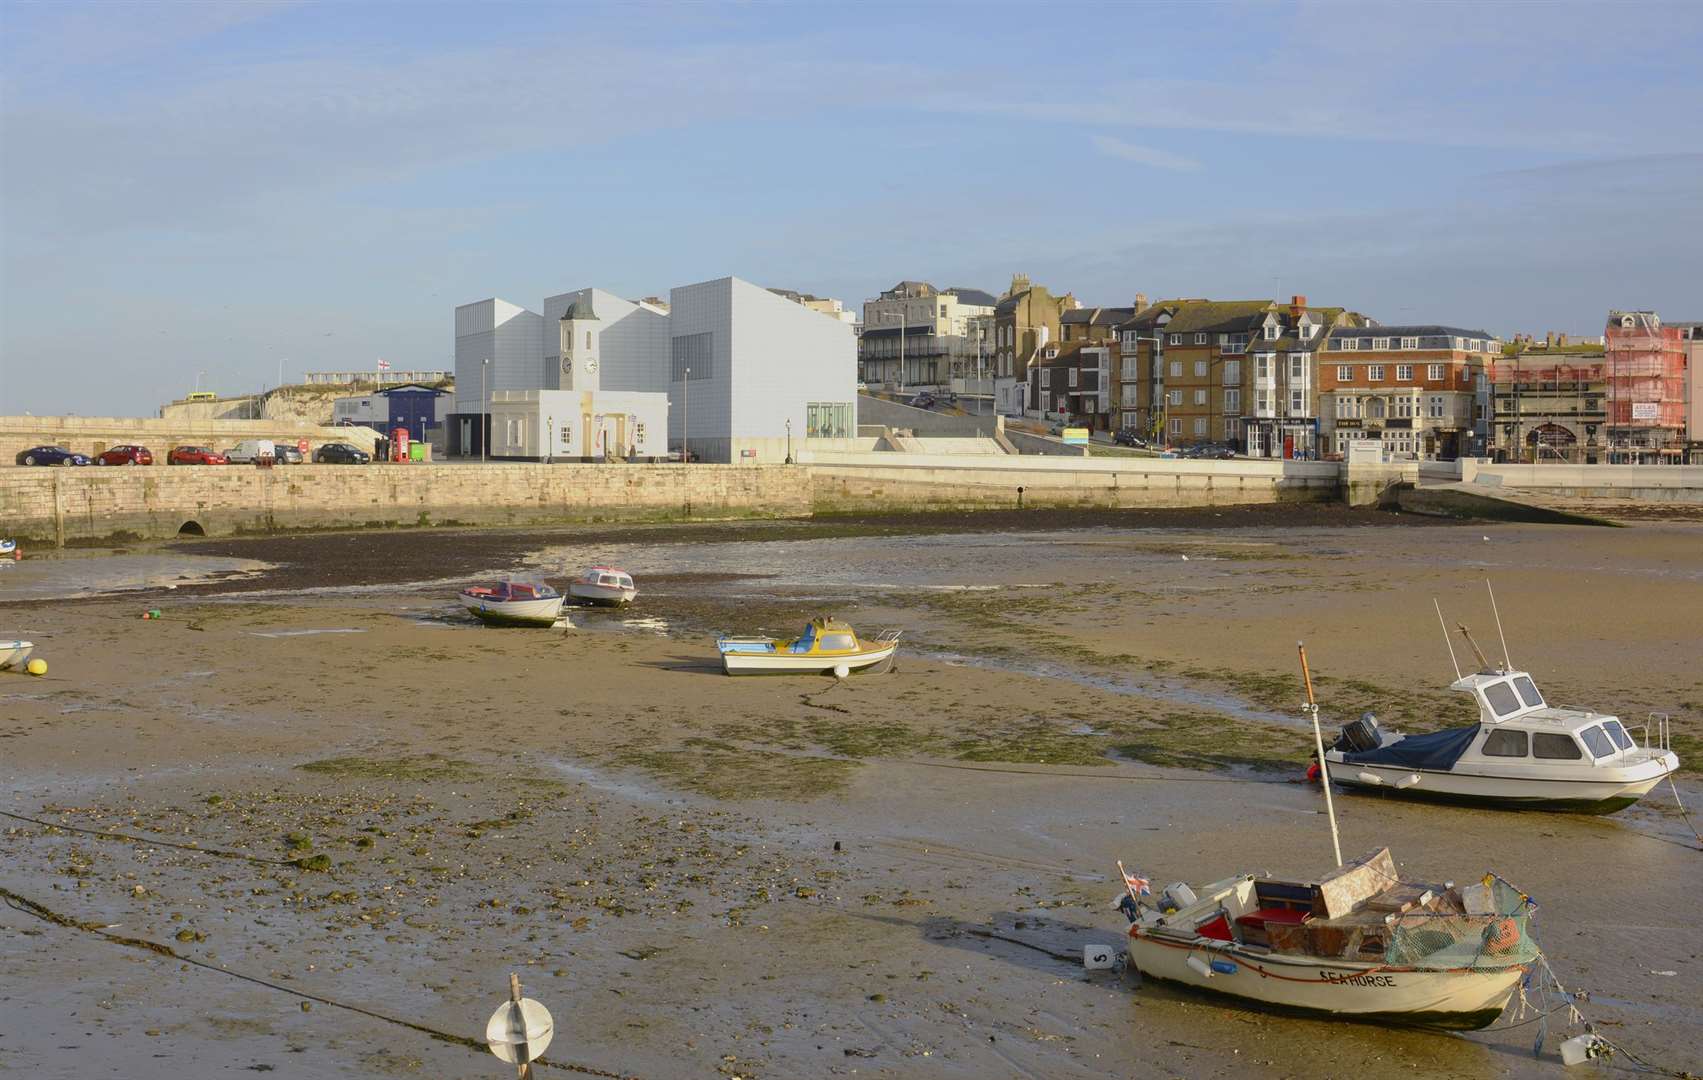 The Harbour Arm on Margate is featured in the game launching next week